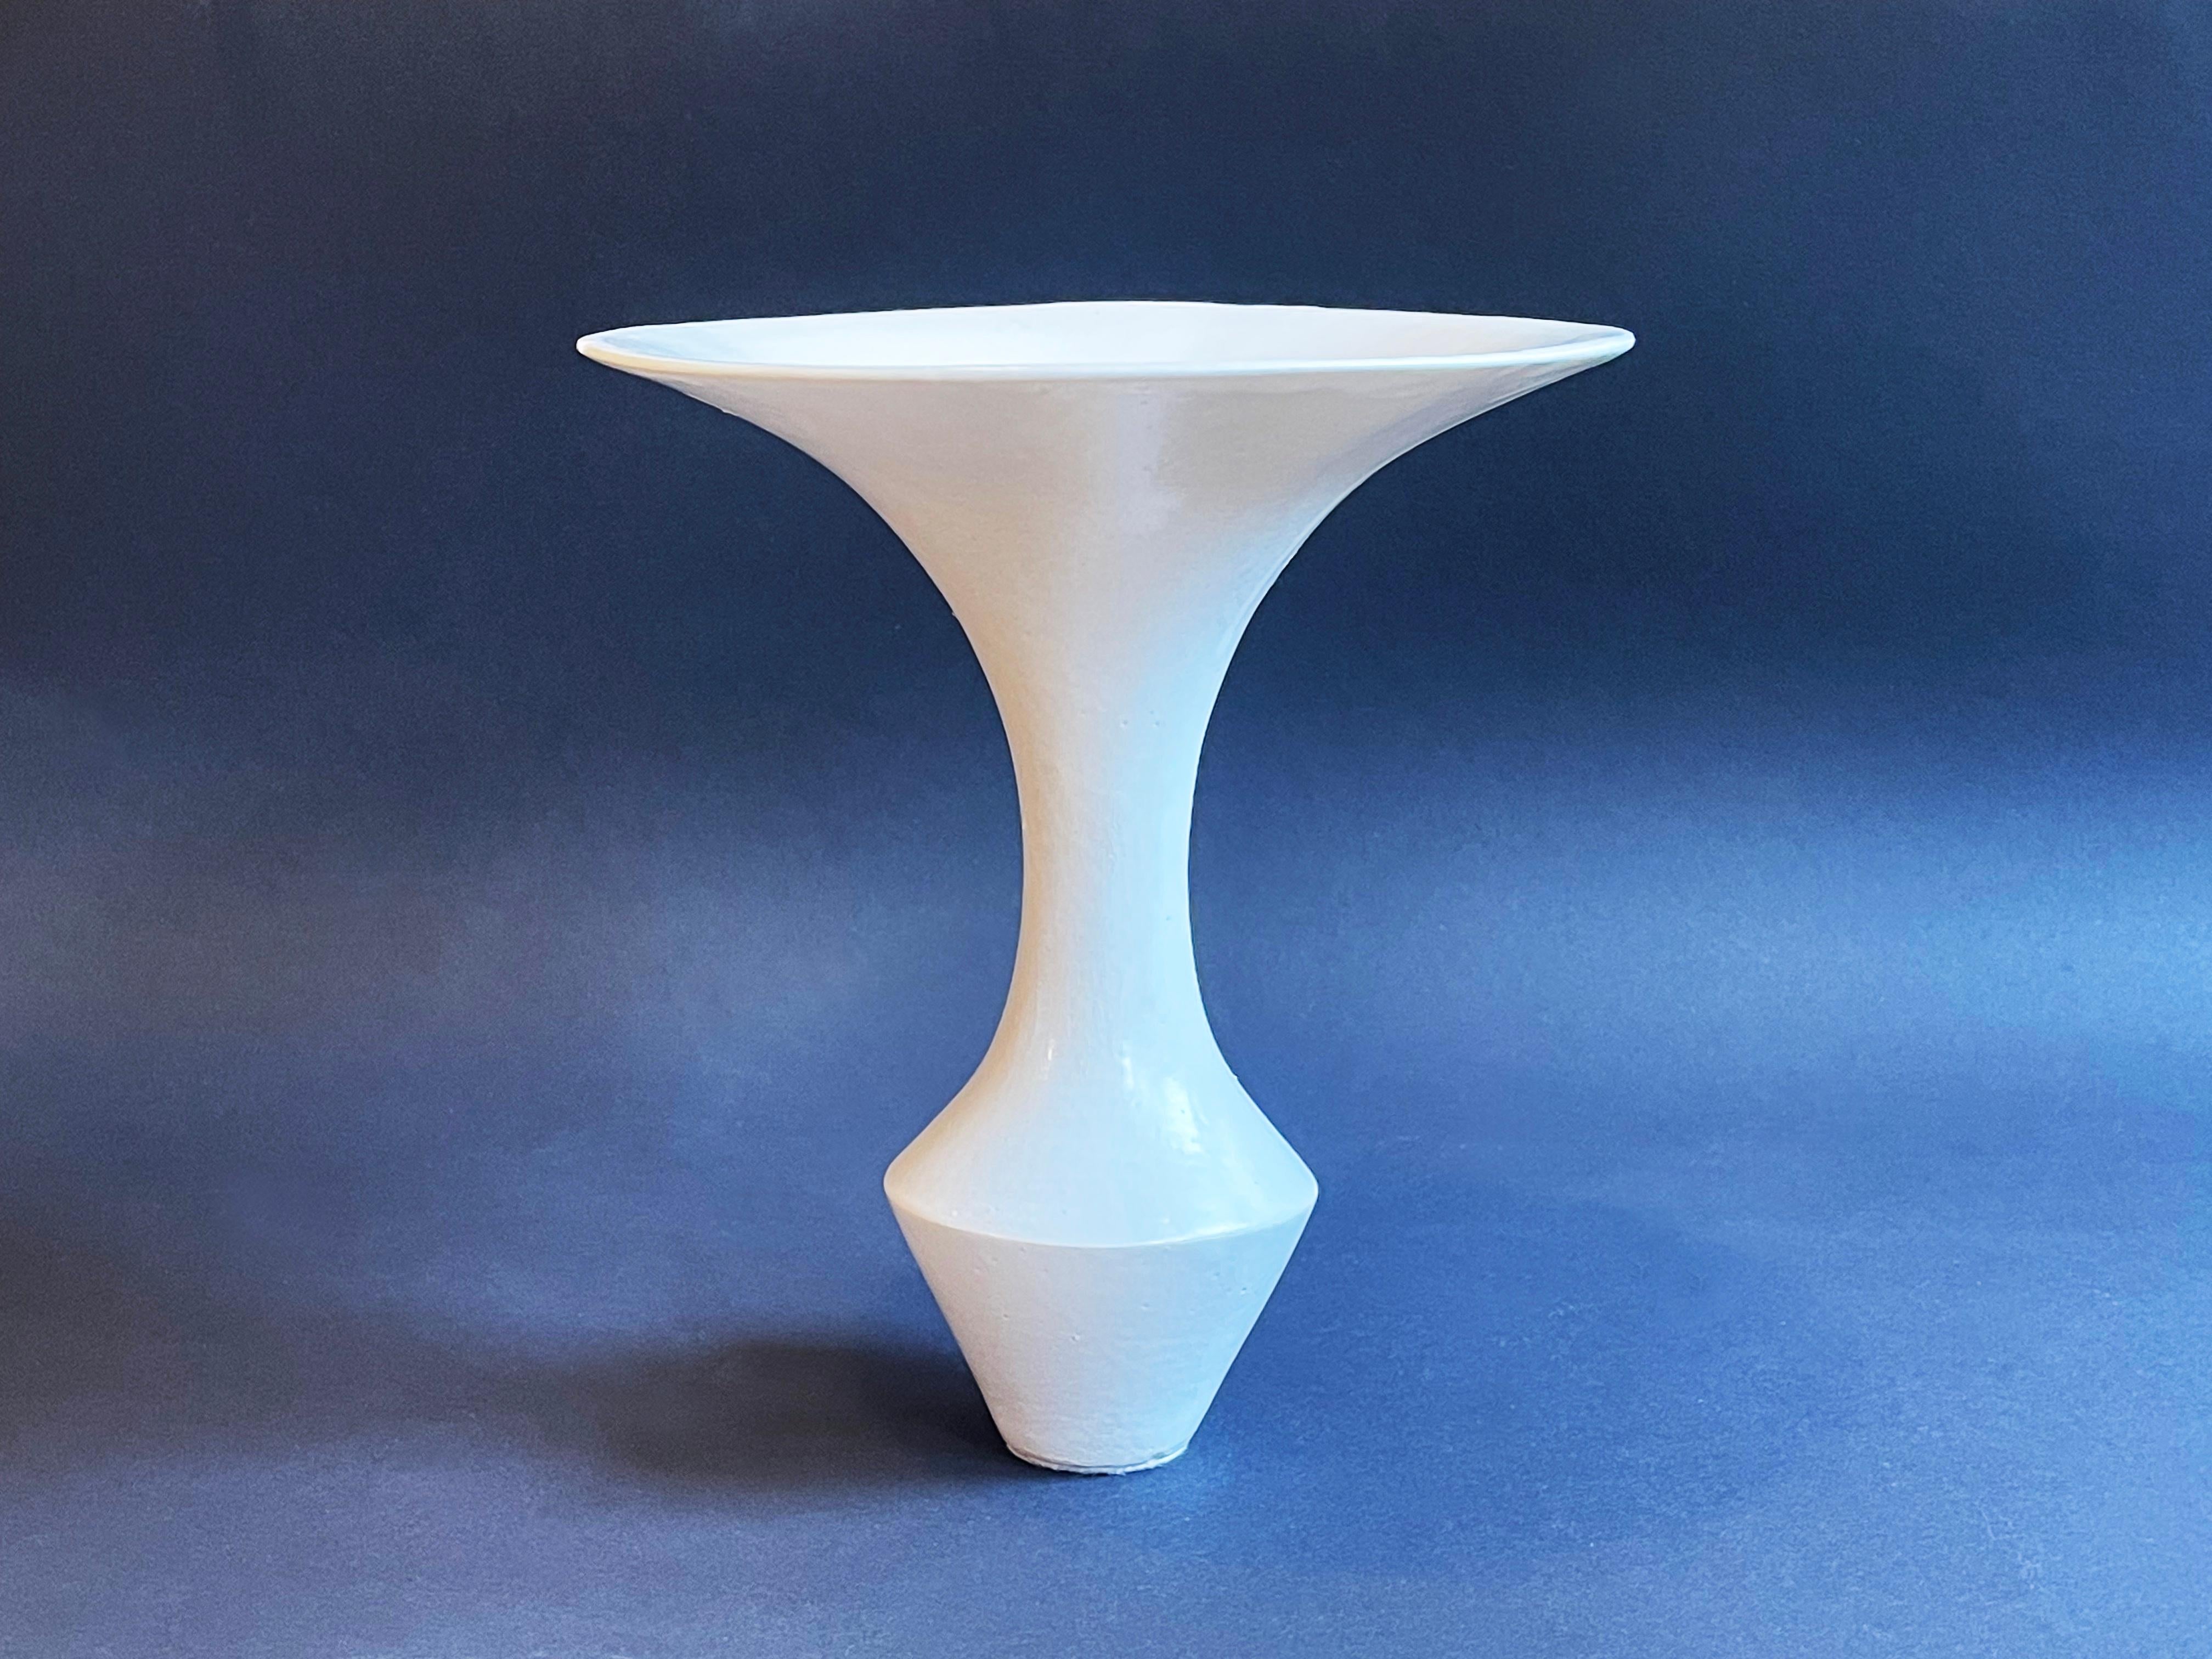 Unique and quite minimalistic Ikebana vase – standing for itself as a piece of art.
Studio ceramic piece, most likely produced in Germany during the 1970s to 1980s.
Marvellous, slightly greyish white or off-white glaze, almost like Fat Lava running